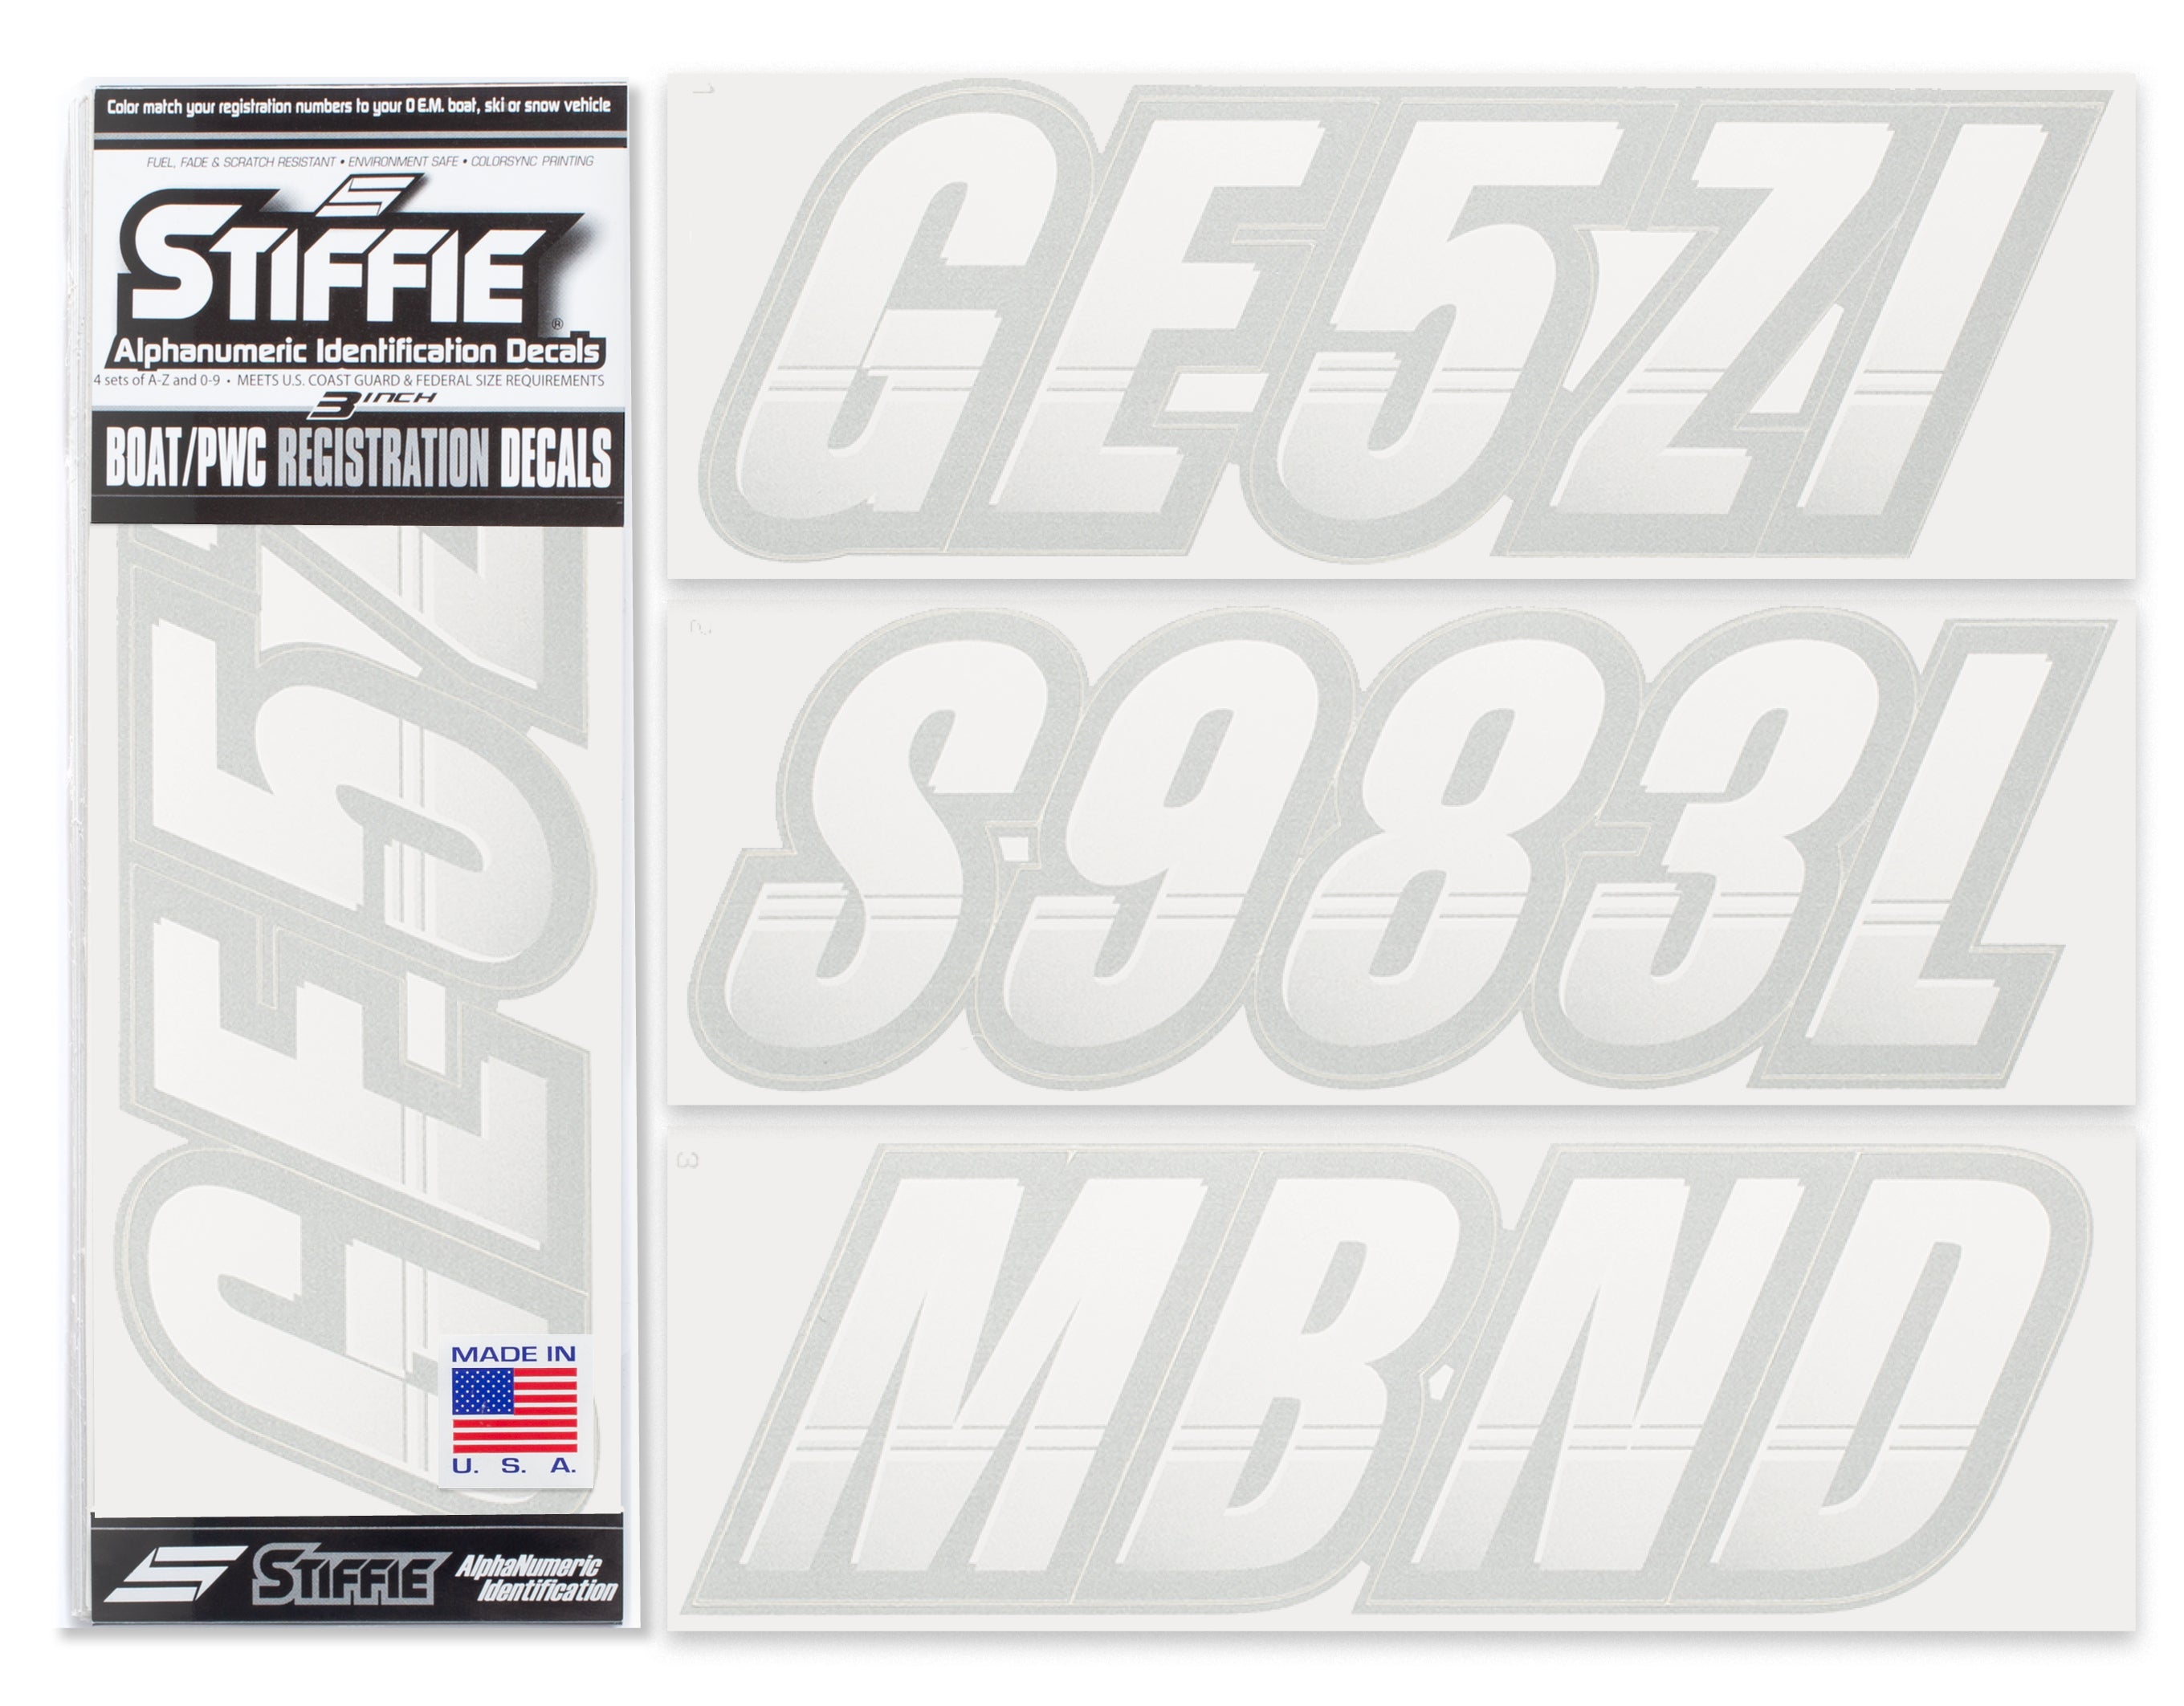 STIFFIE Techtron White/Silver 3" Alpha-Numeric Registration Identification Numbers Stickers Decals for Boats & Personal Watercraft